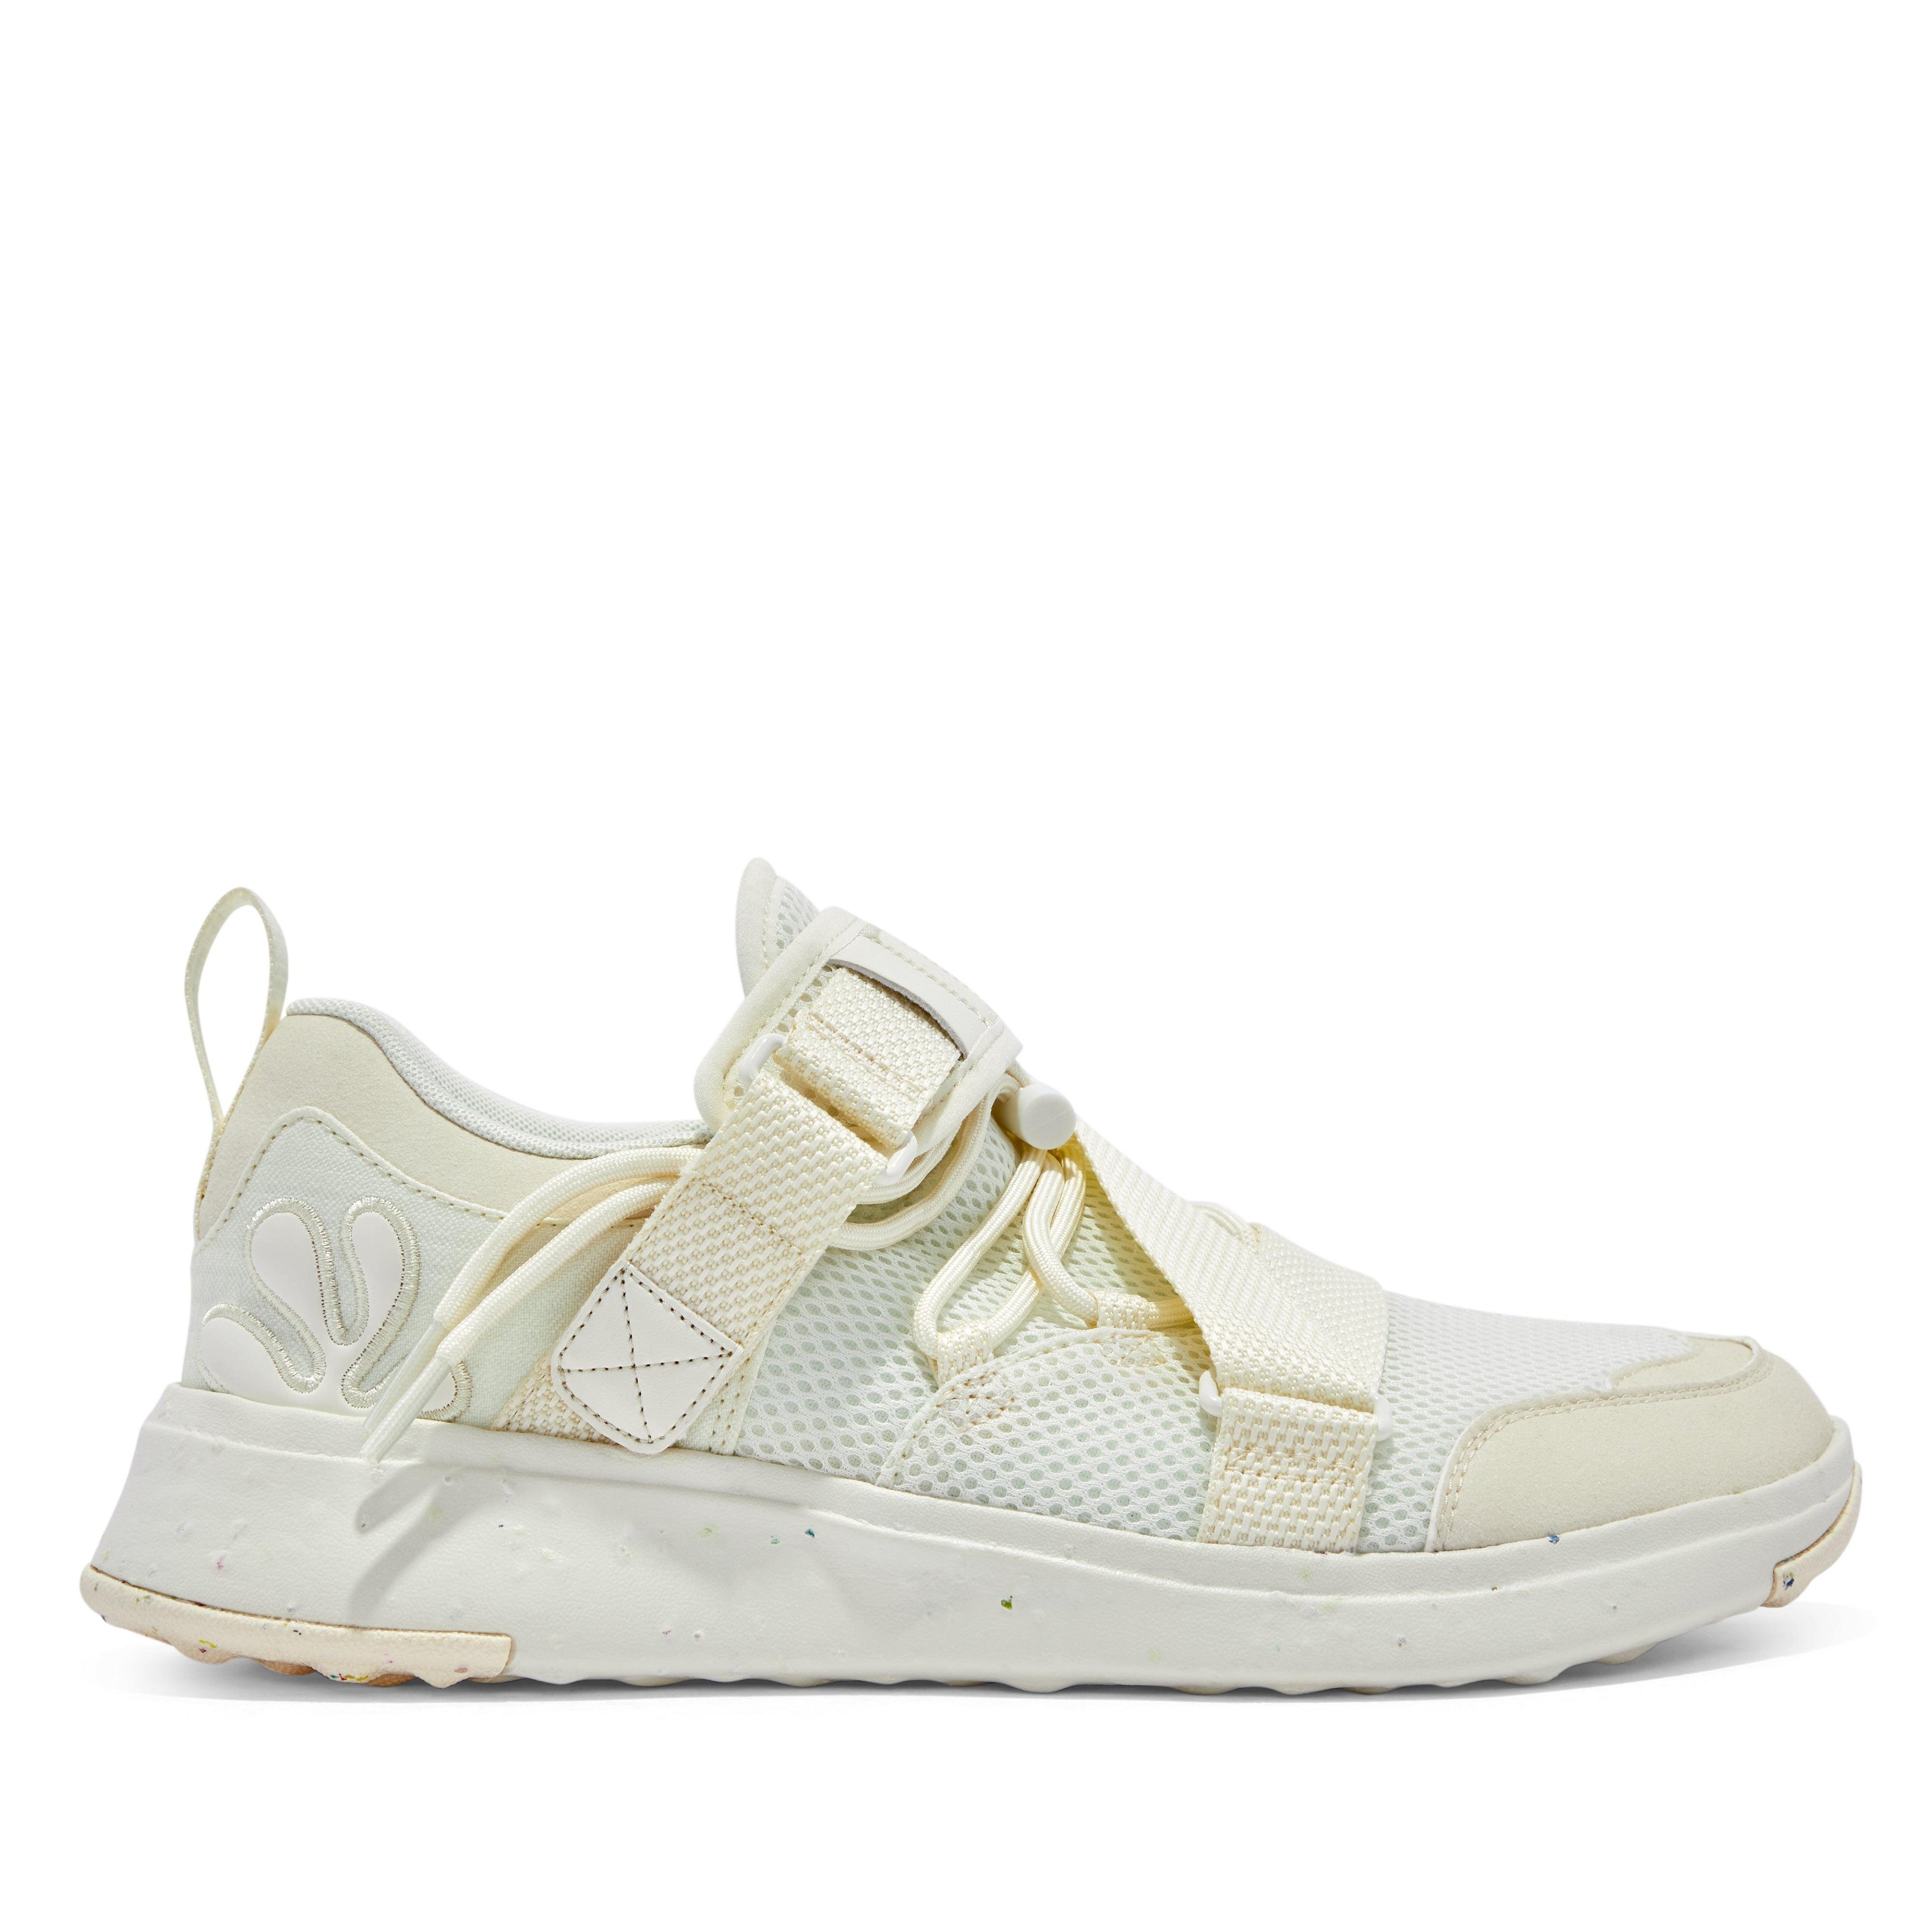 The Wasted Collective - S1L-010 Sneakers - (Cream) by WASTED COLLECTIVE